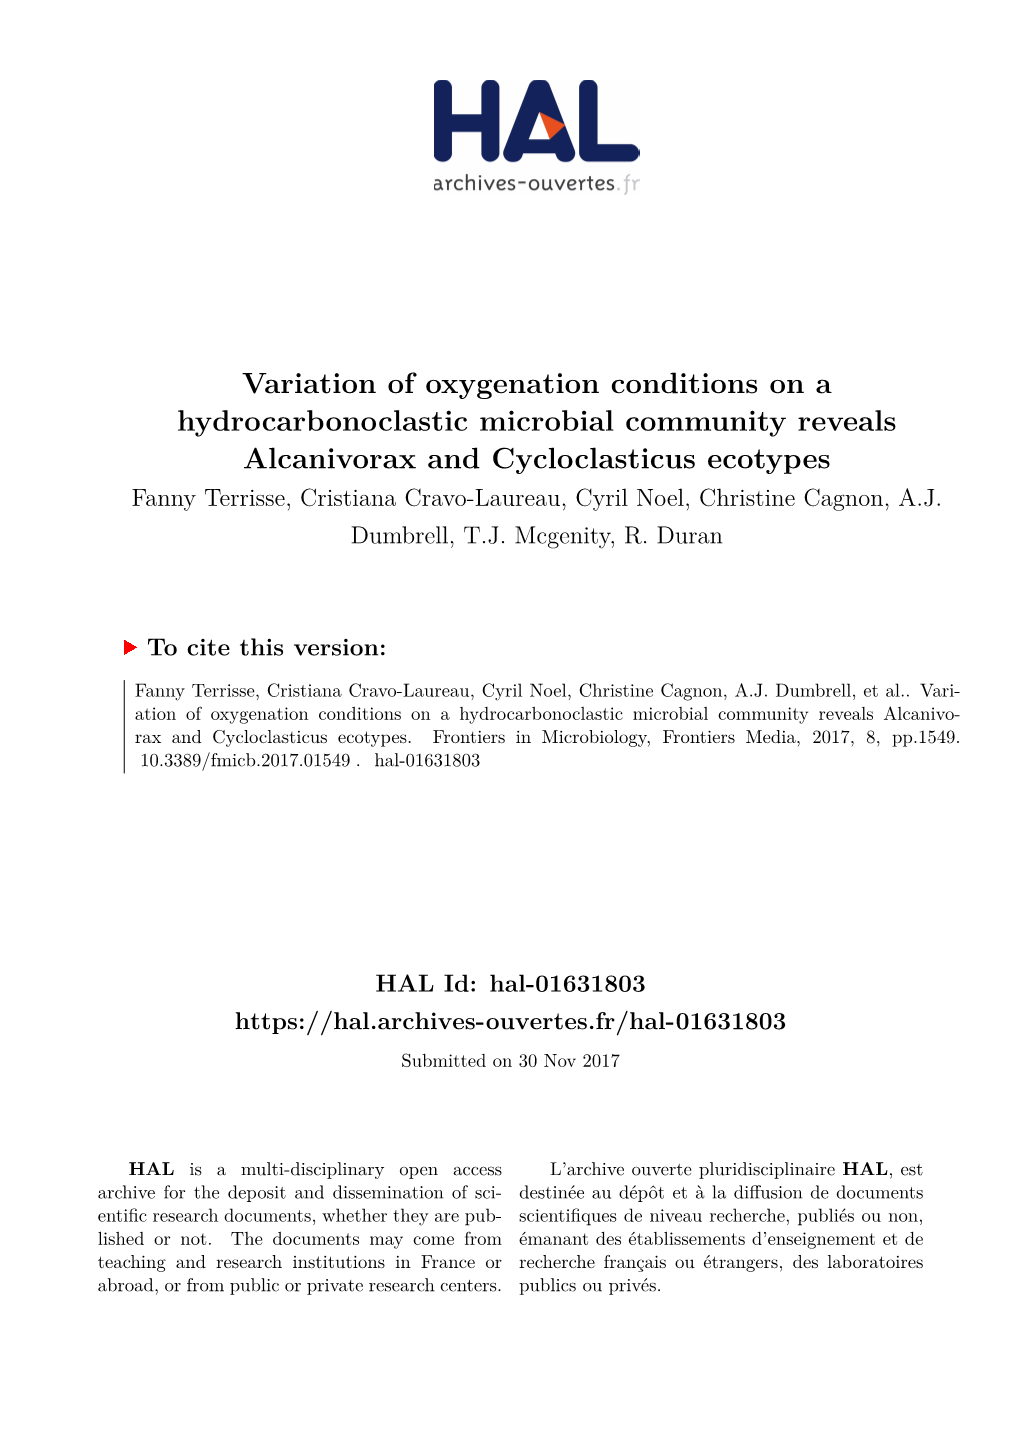 Variation of Oxygenation Conditions on a Hydrocarbonoclastic Microbial